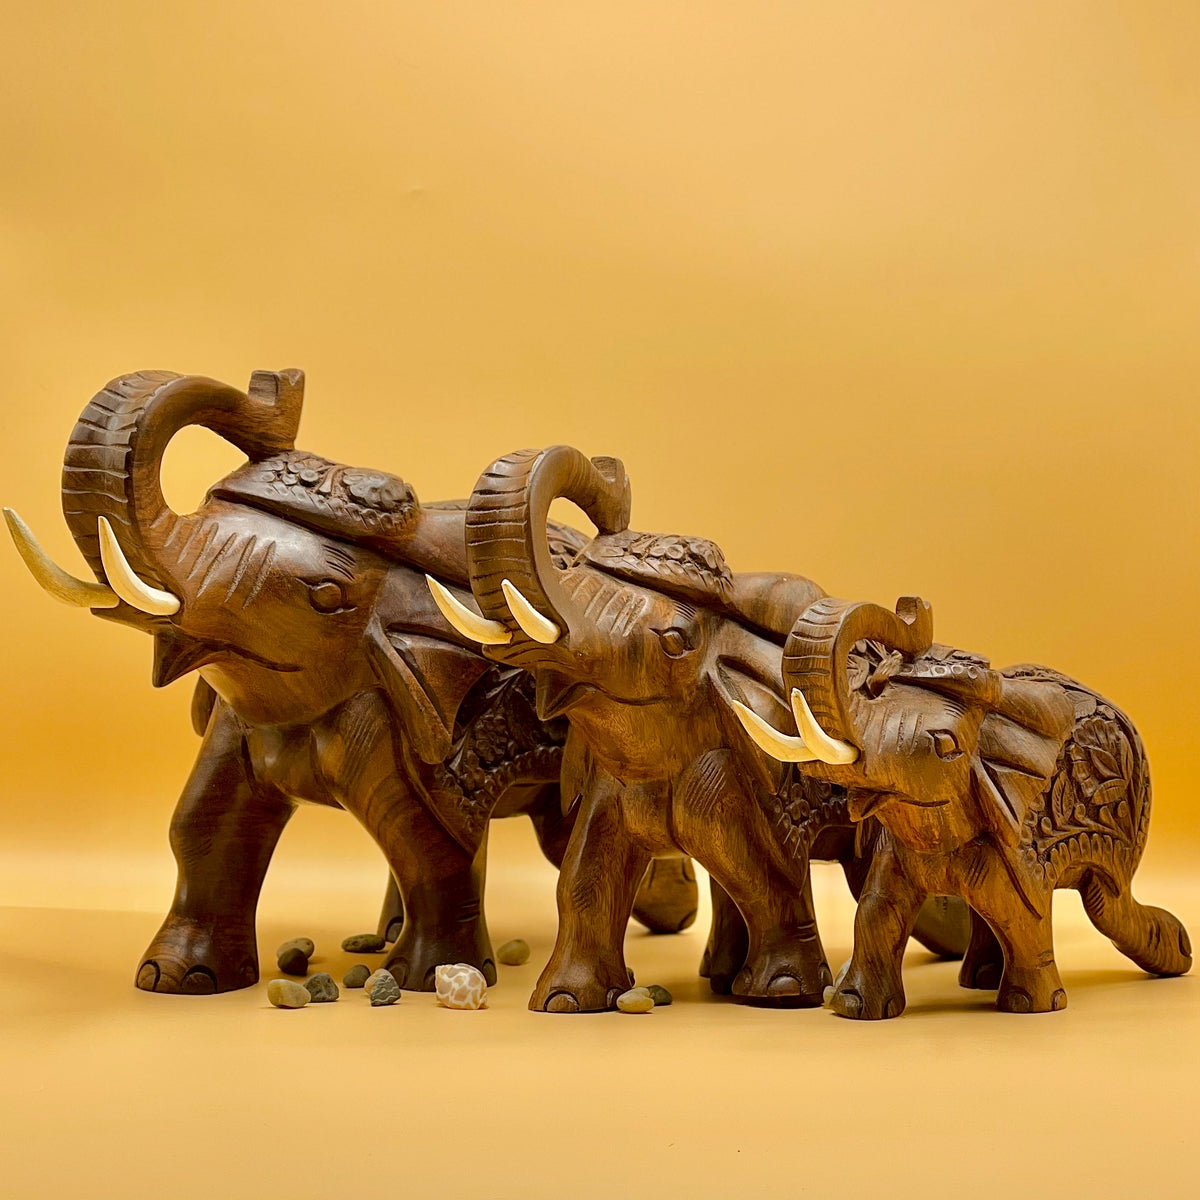 Jointless Shesham Handcrafted Elephant Sculpture